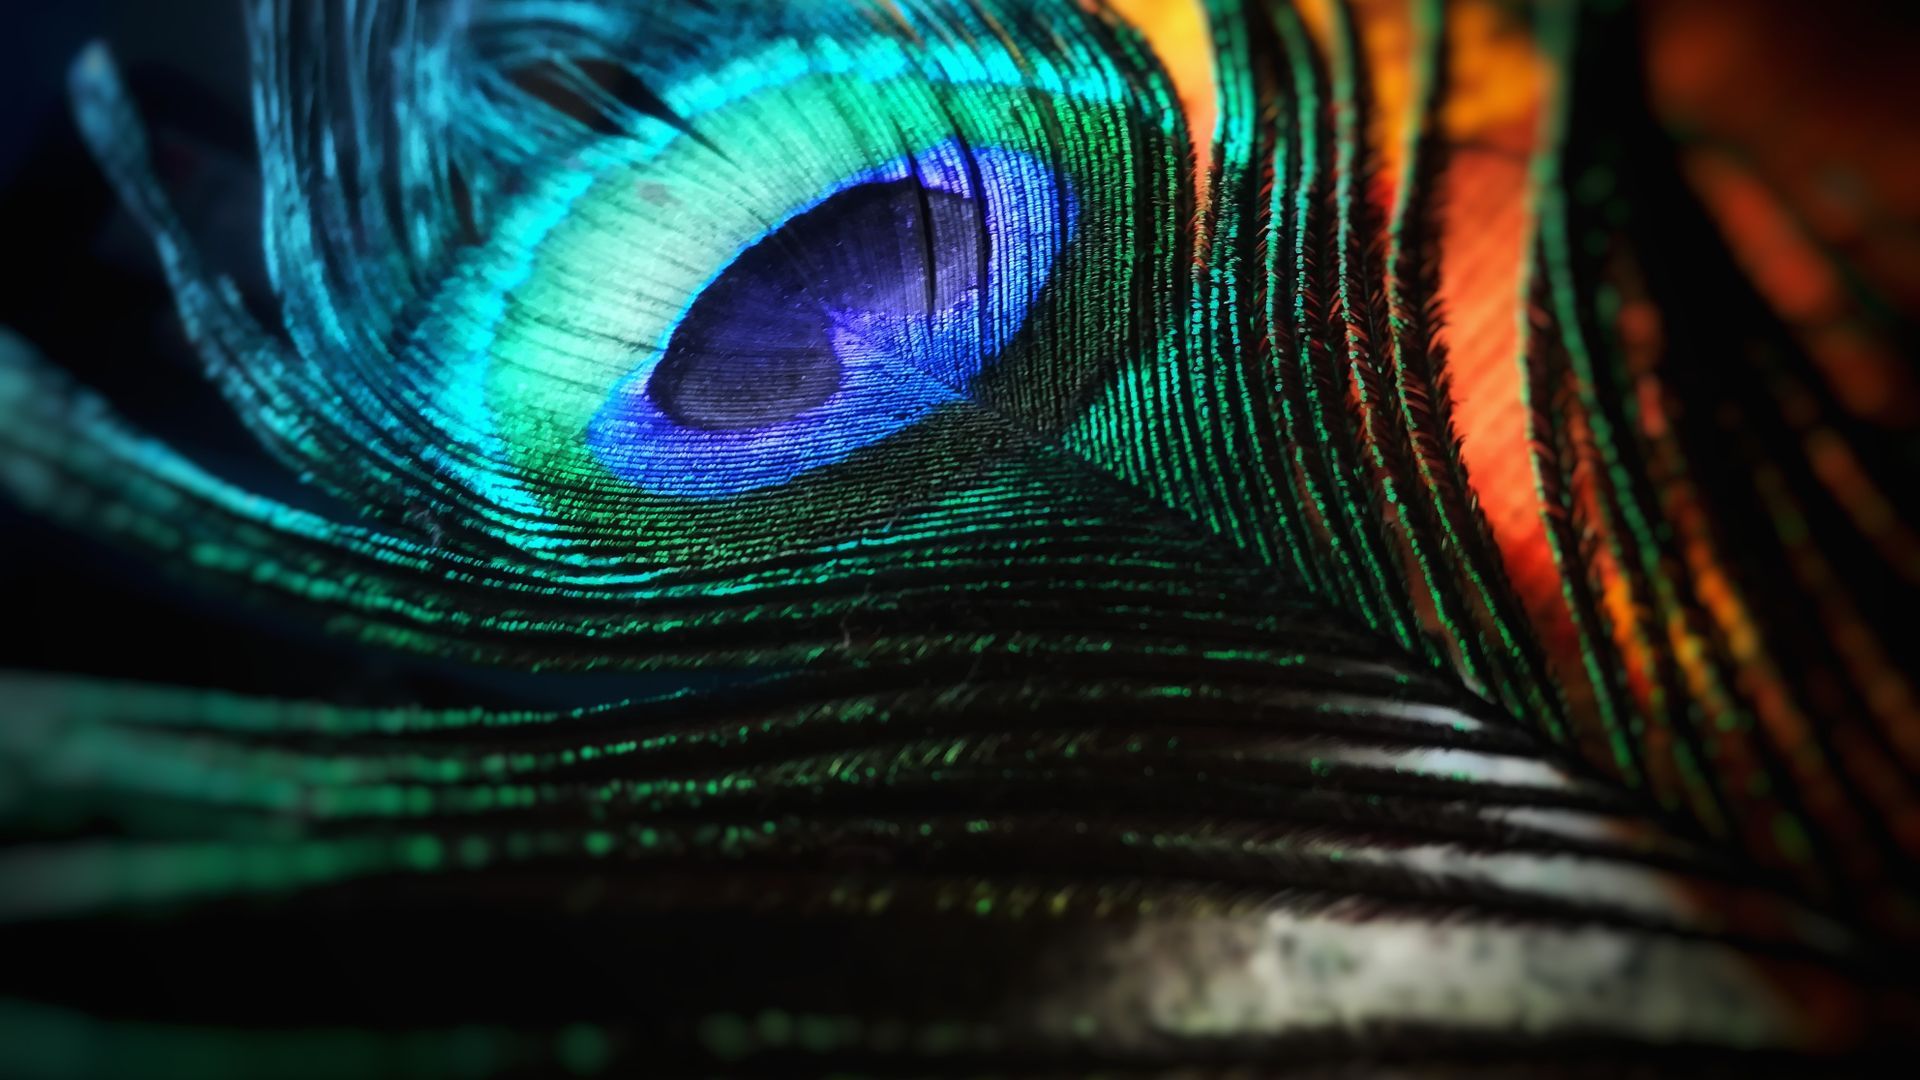 1920x1080 Green And Blue Peacock Feather Wallpaper